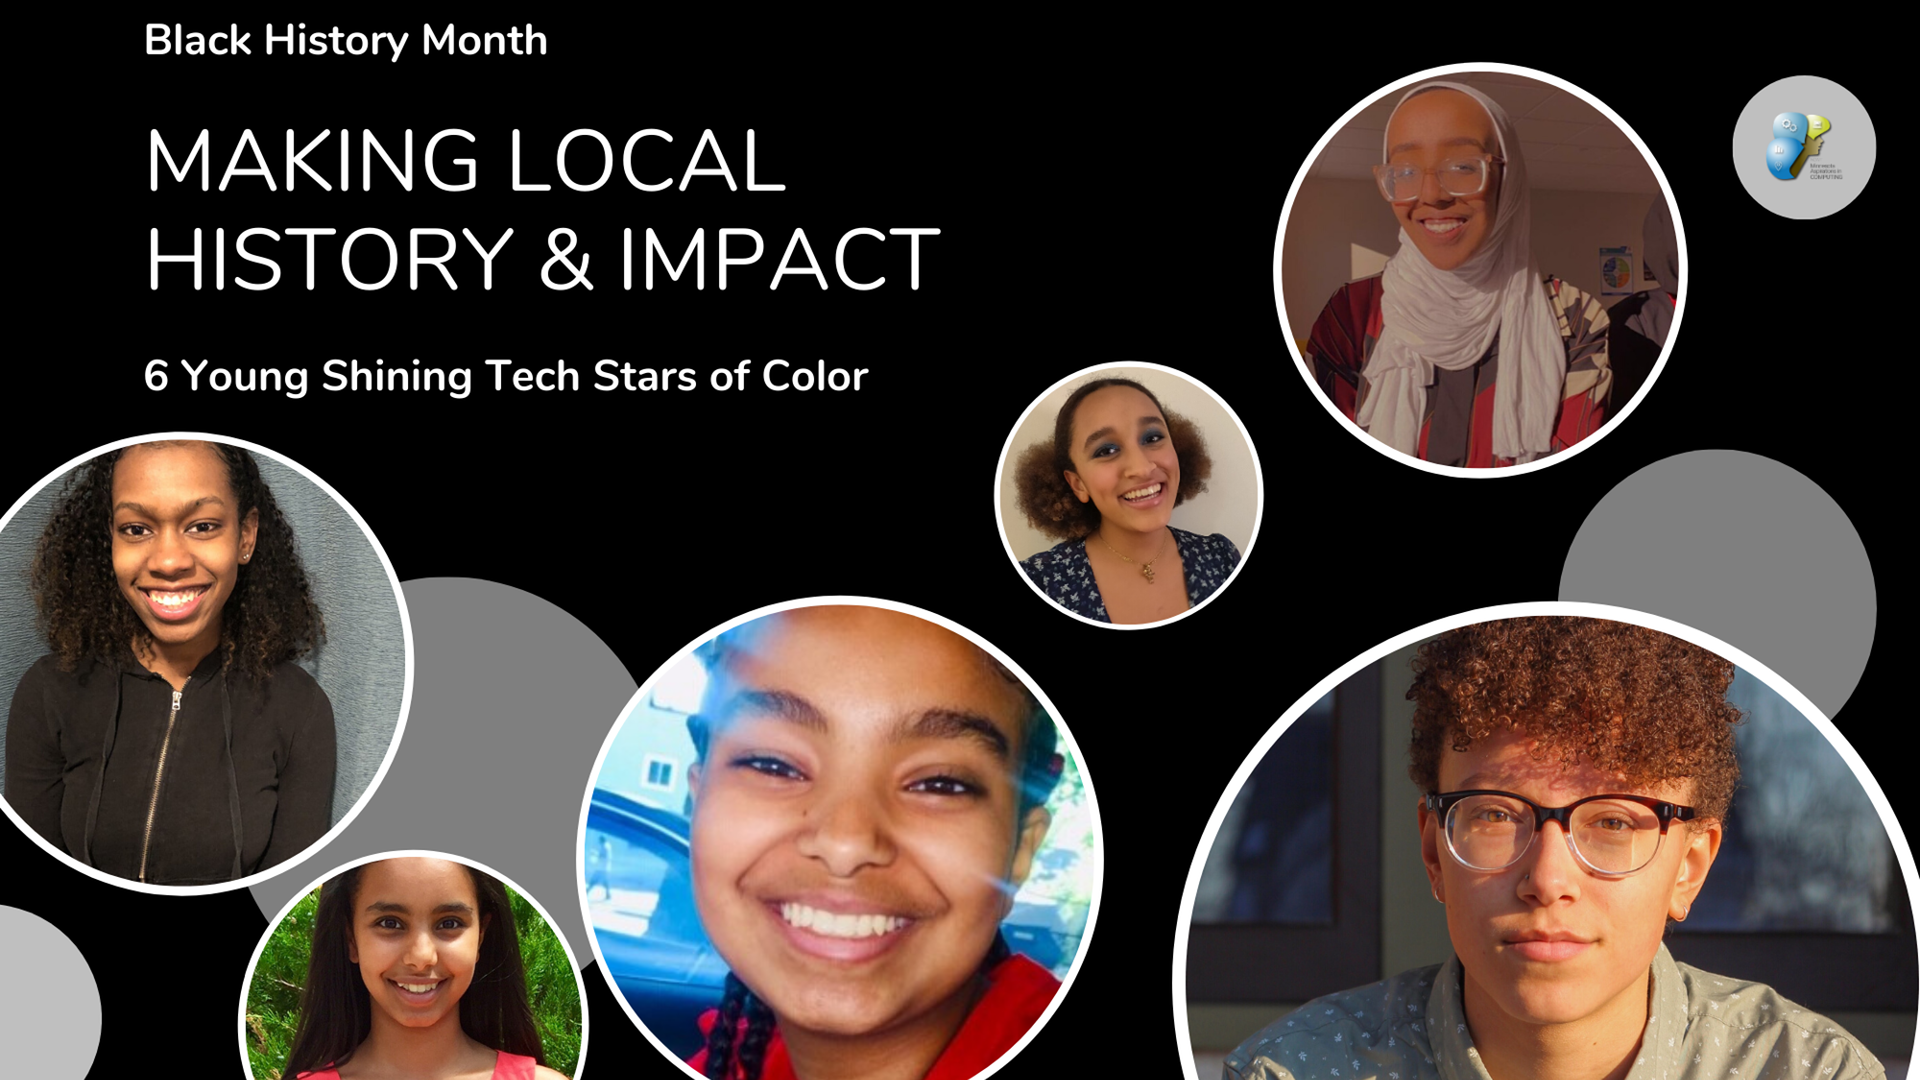 These 6 Young Women of Color are Making Local History and Impact, as Shining Tech Stars